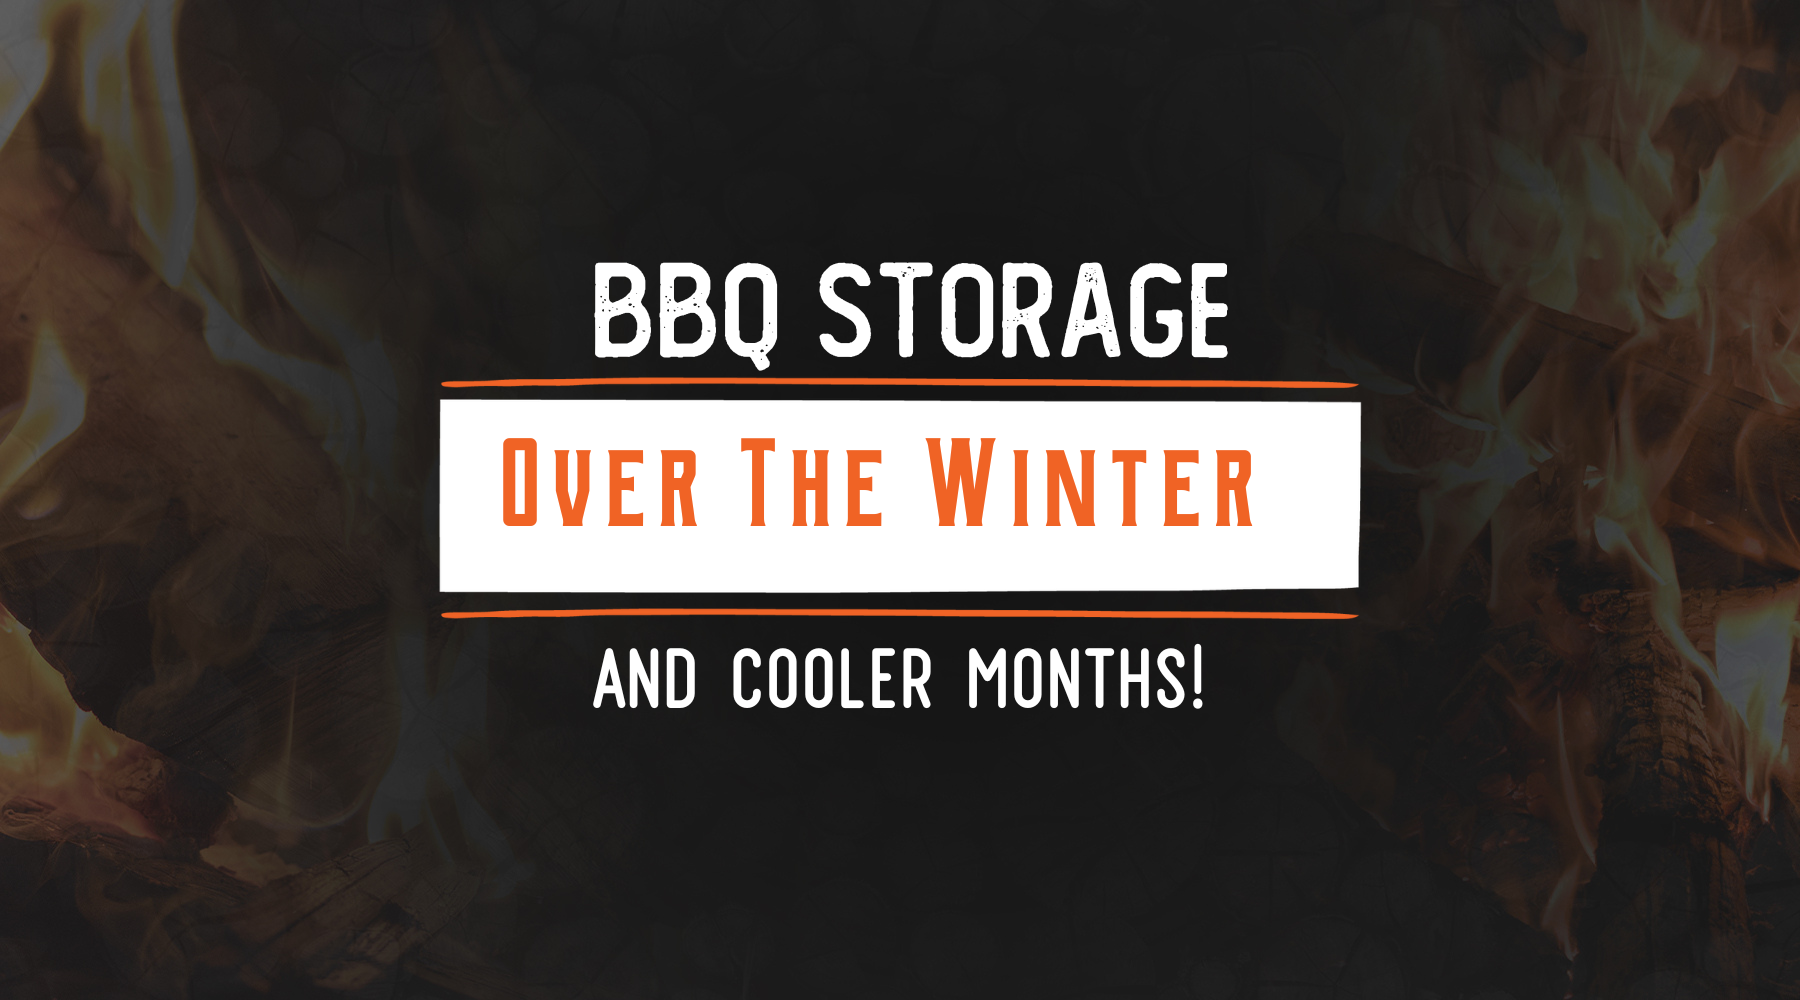 How to Store Your BBQ Over Winter? A Beginner’s Guide!